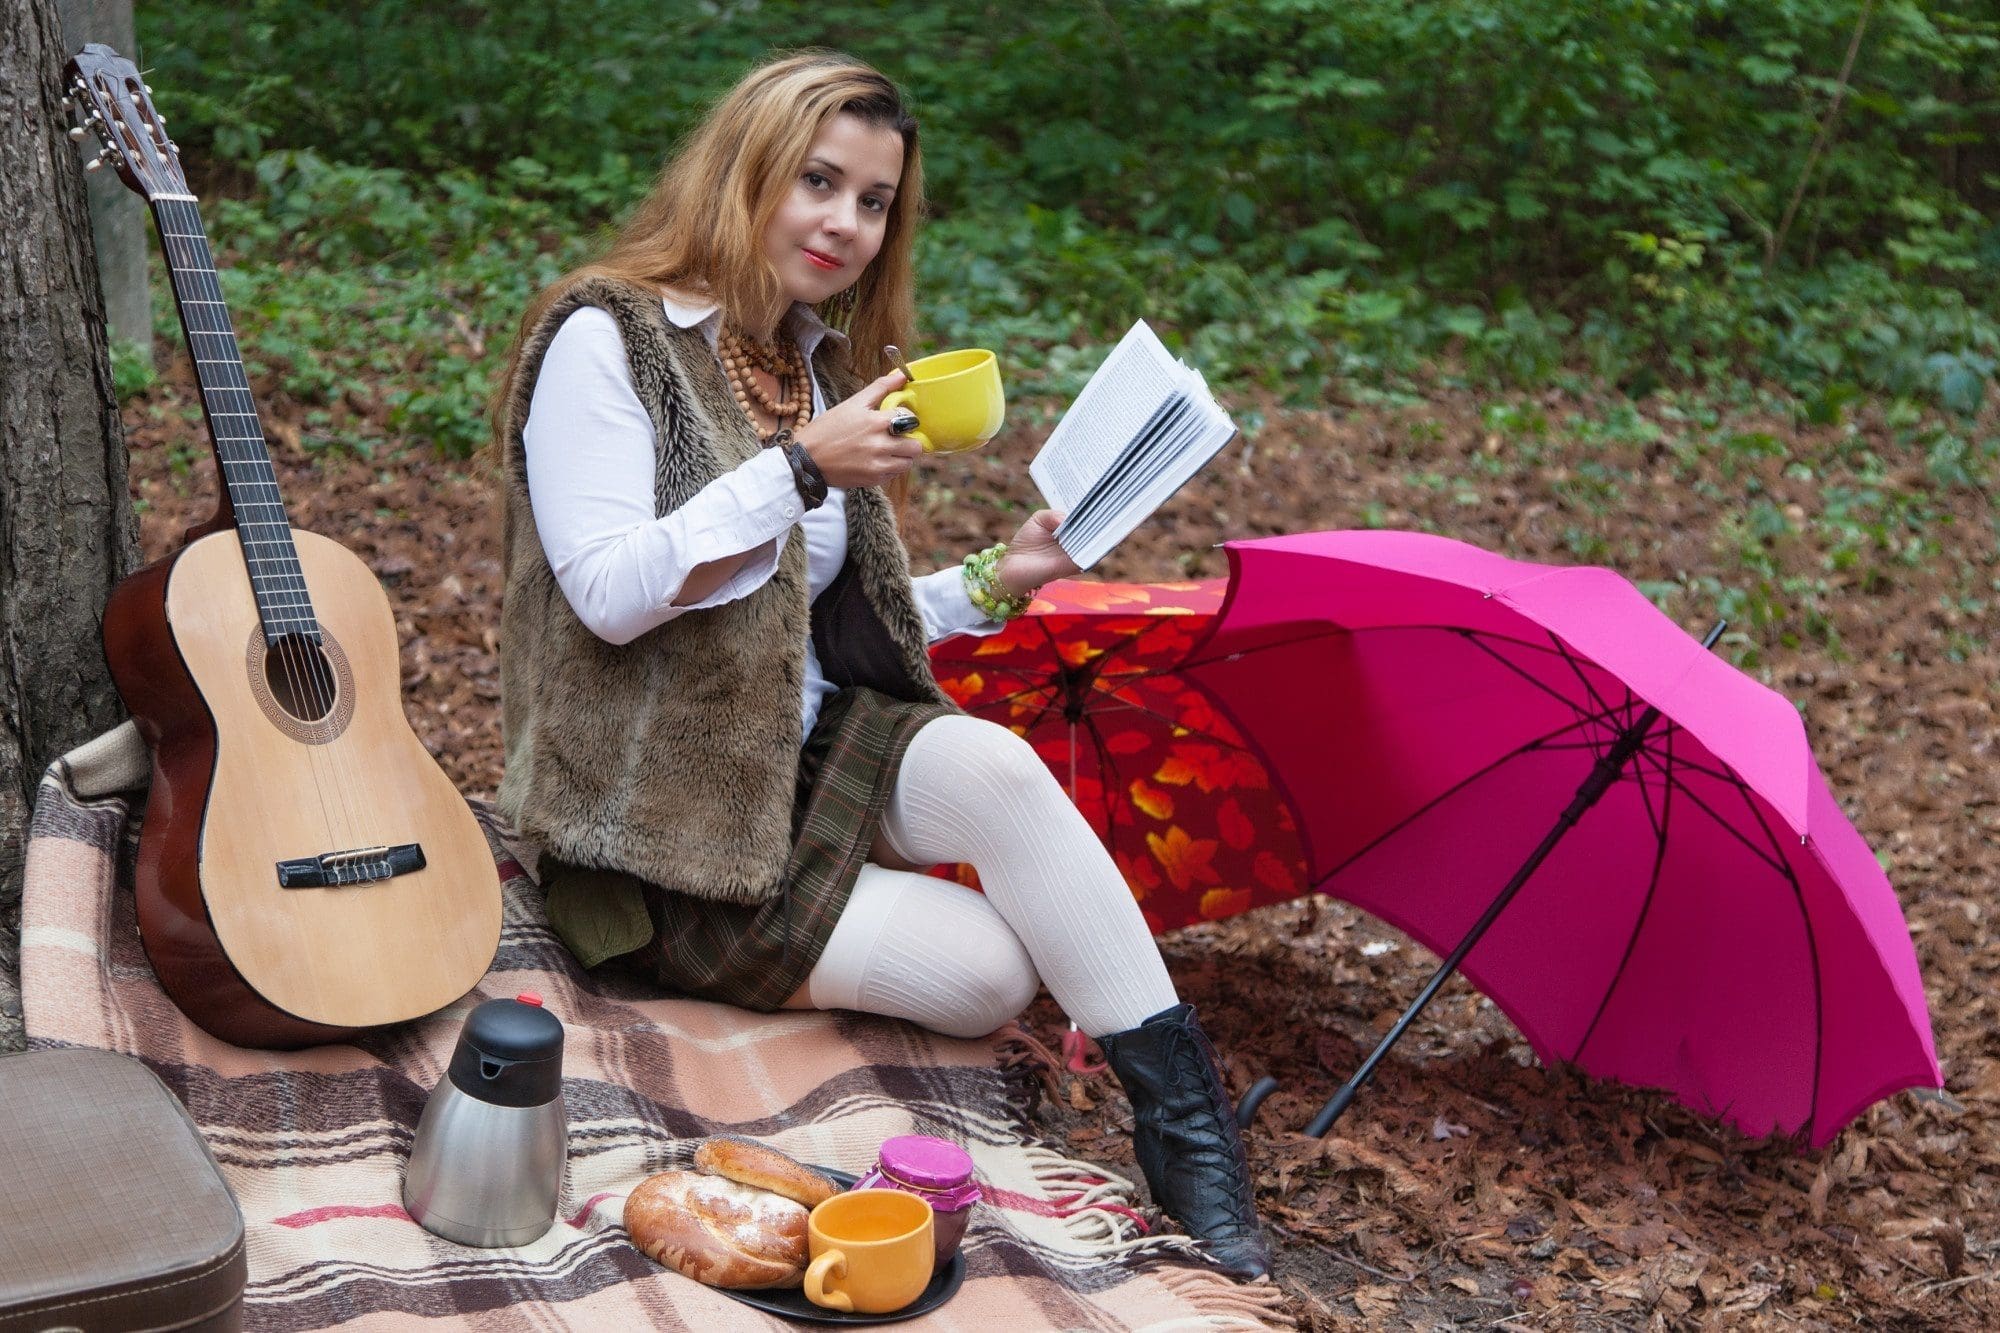 Music biographies Portrait Of Female At Picnic